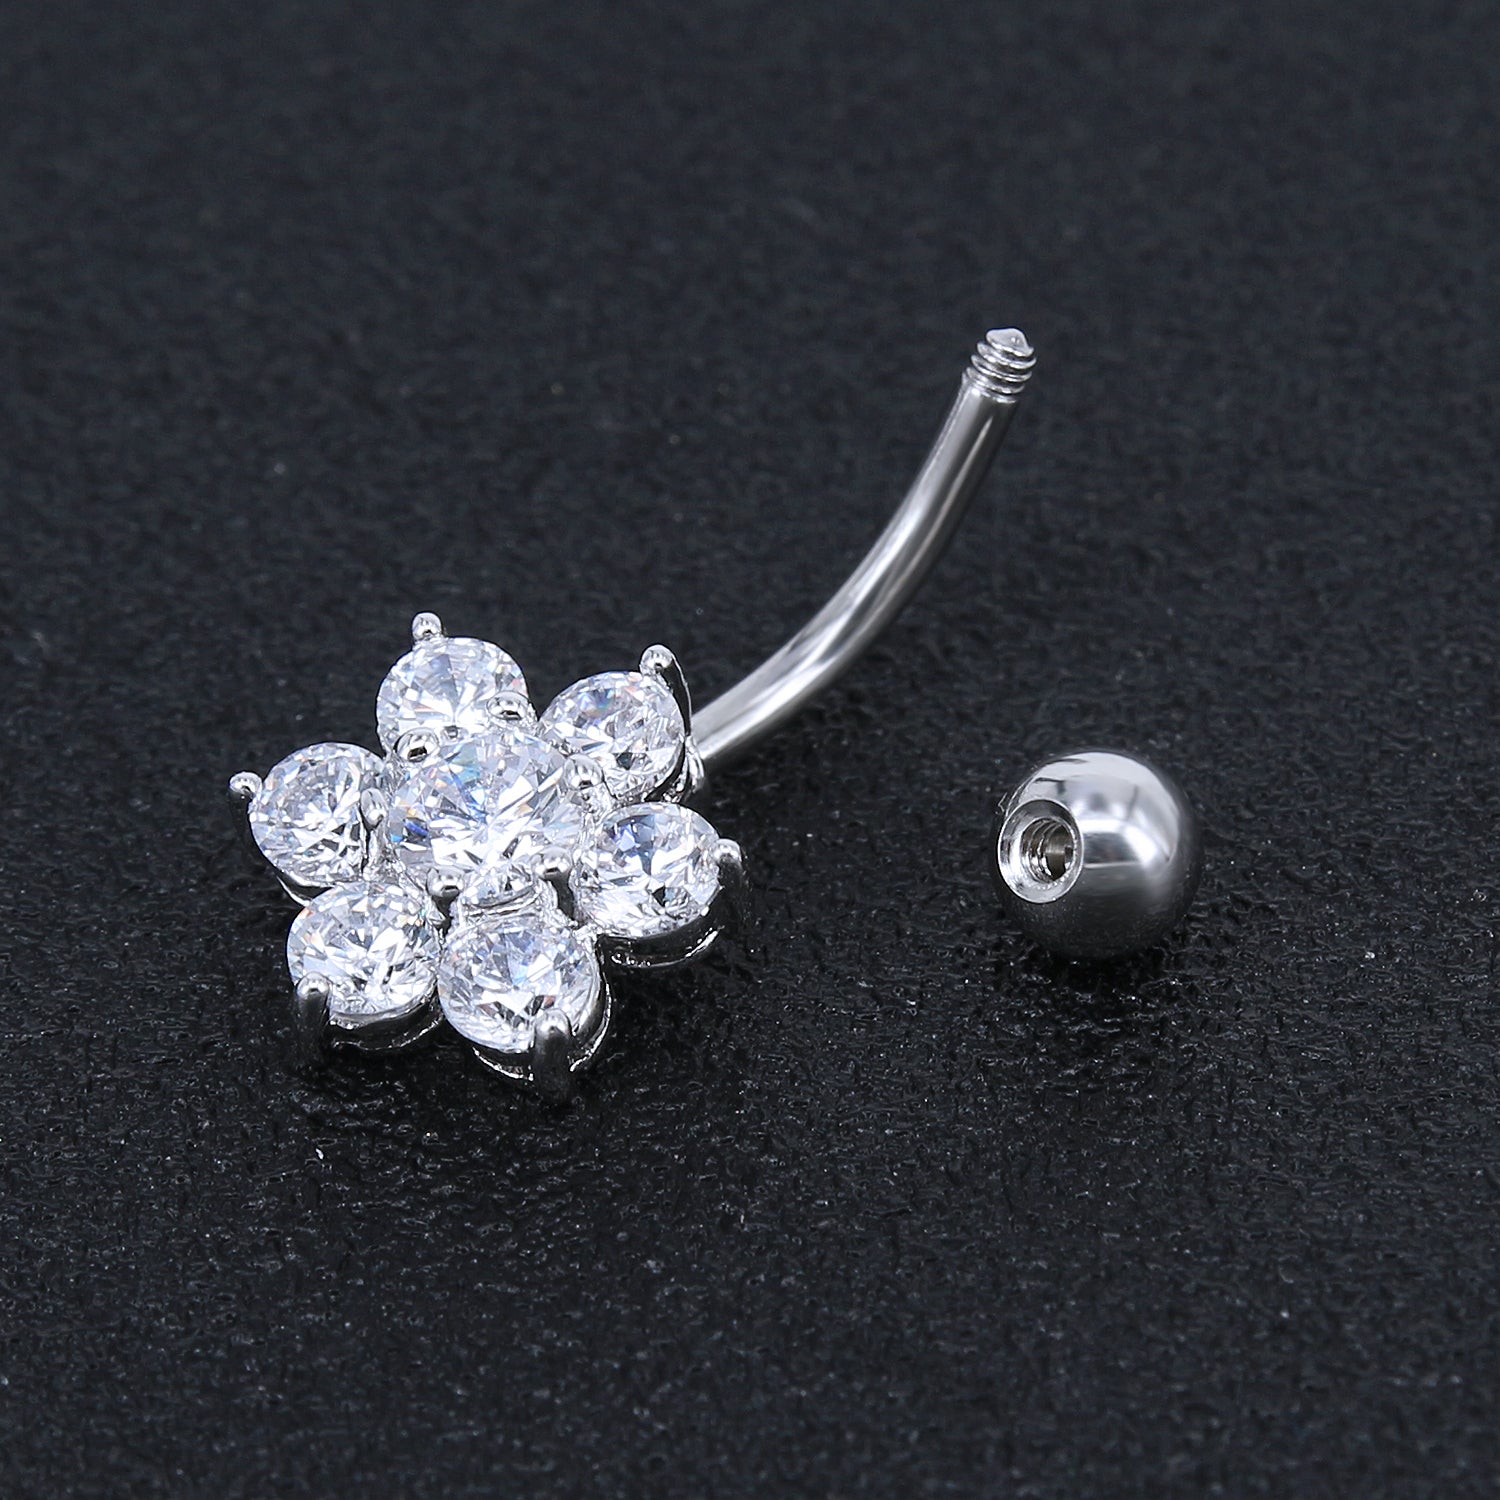 14g-Flower-Stainless-Steel-Belly-Button-Rings-Cubic-Zirconia-Navel-Ring-Piercing-Jewelry